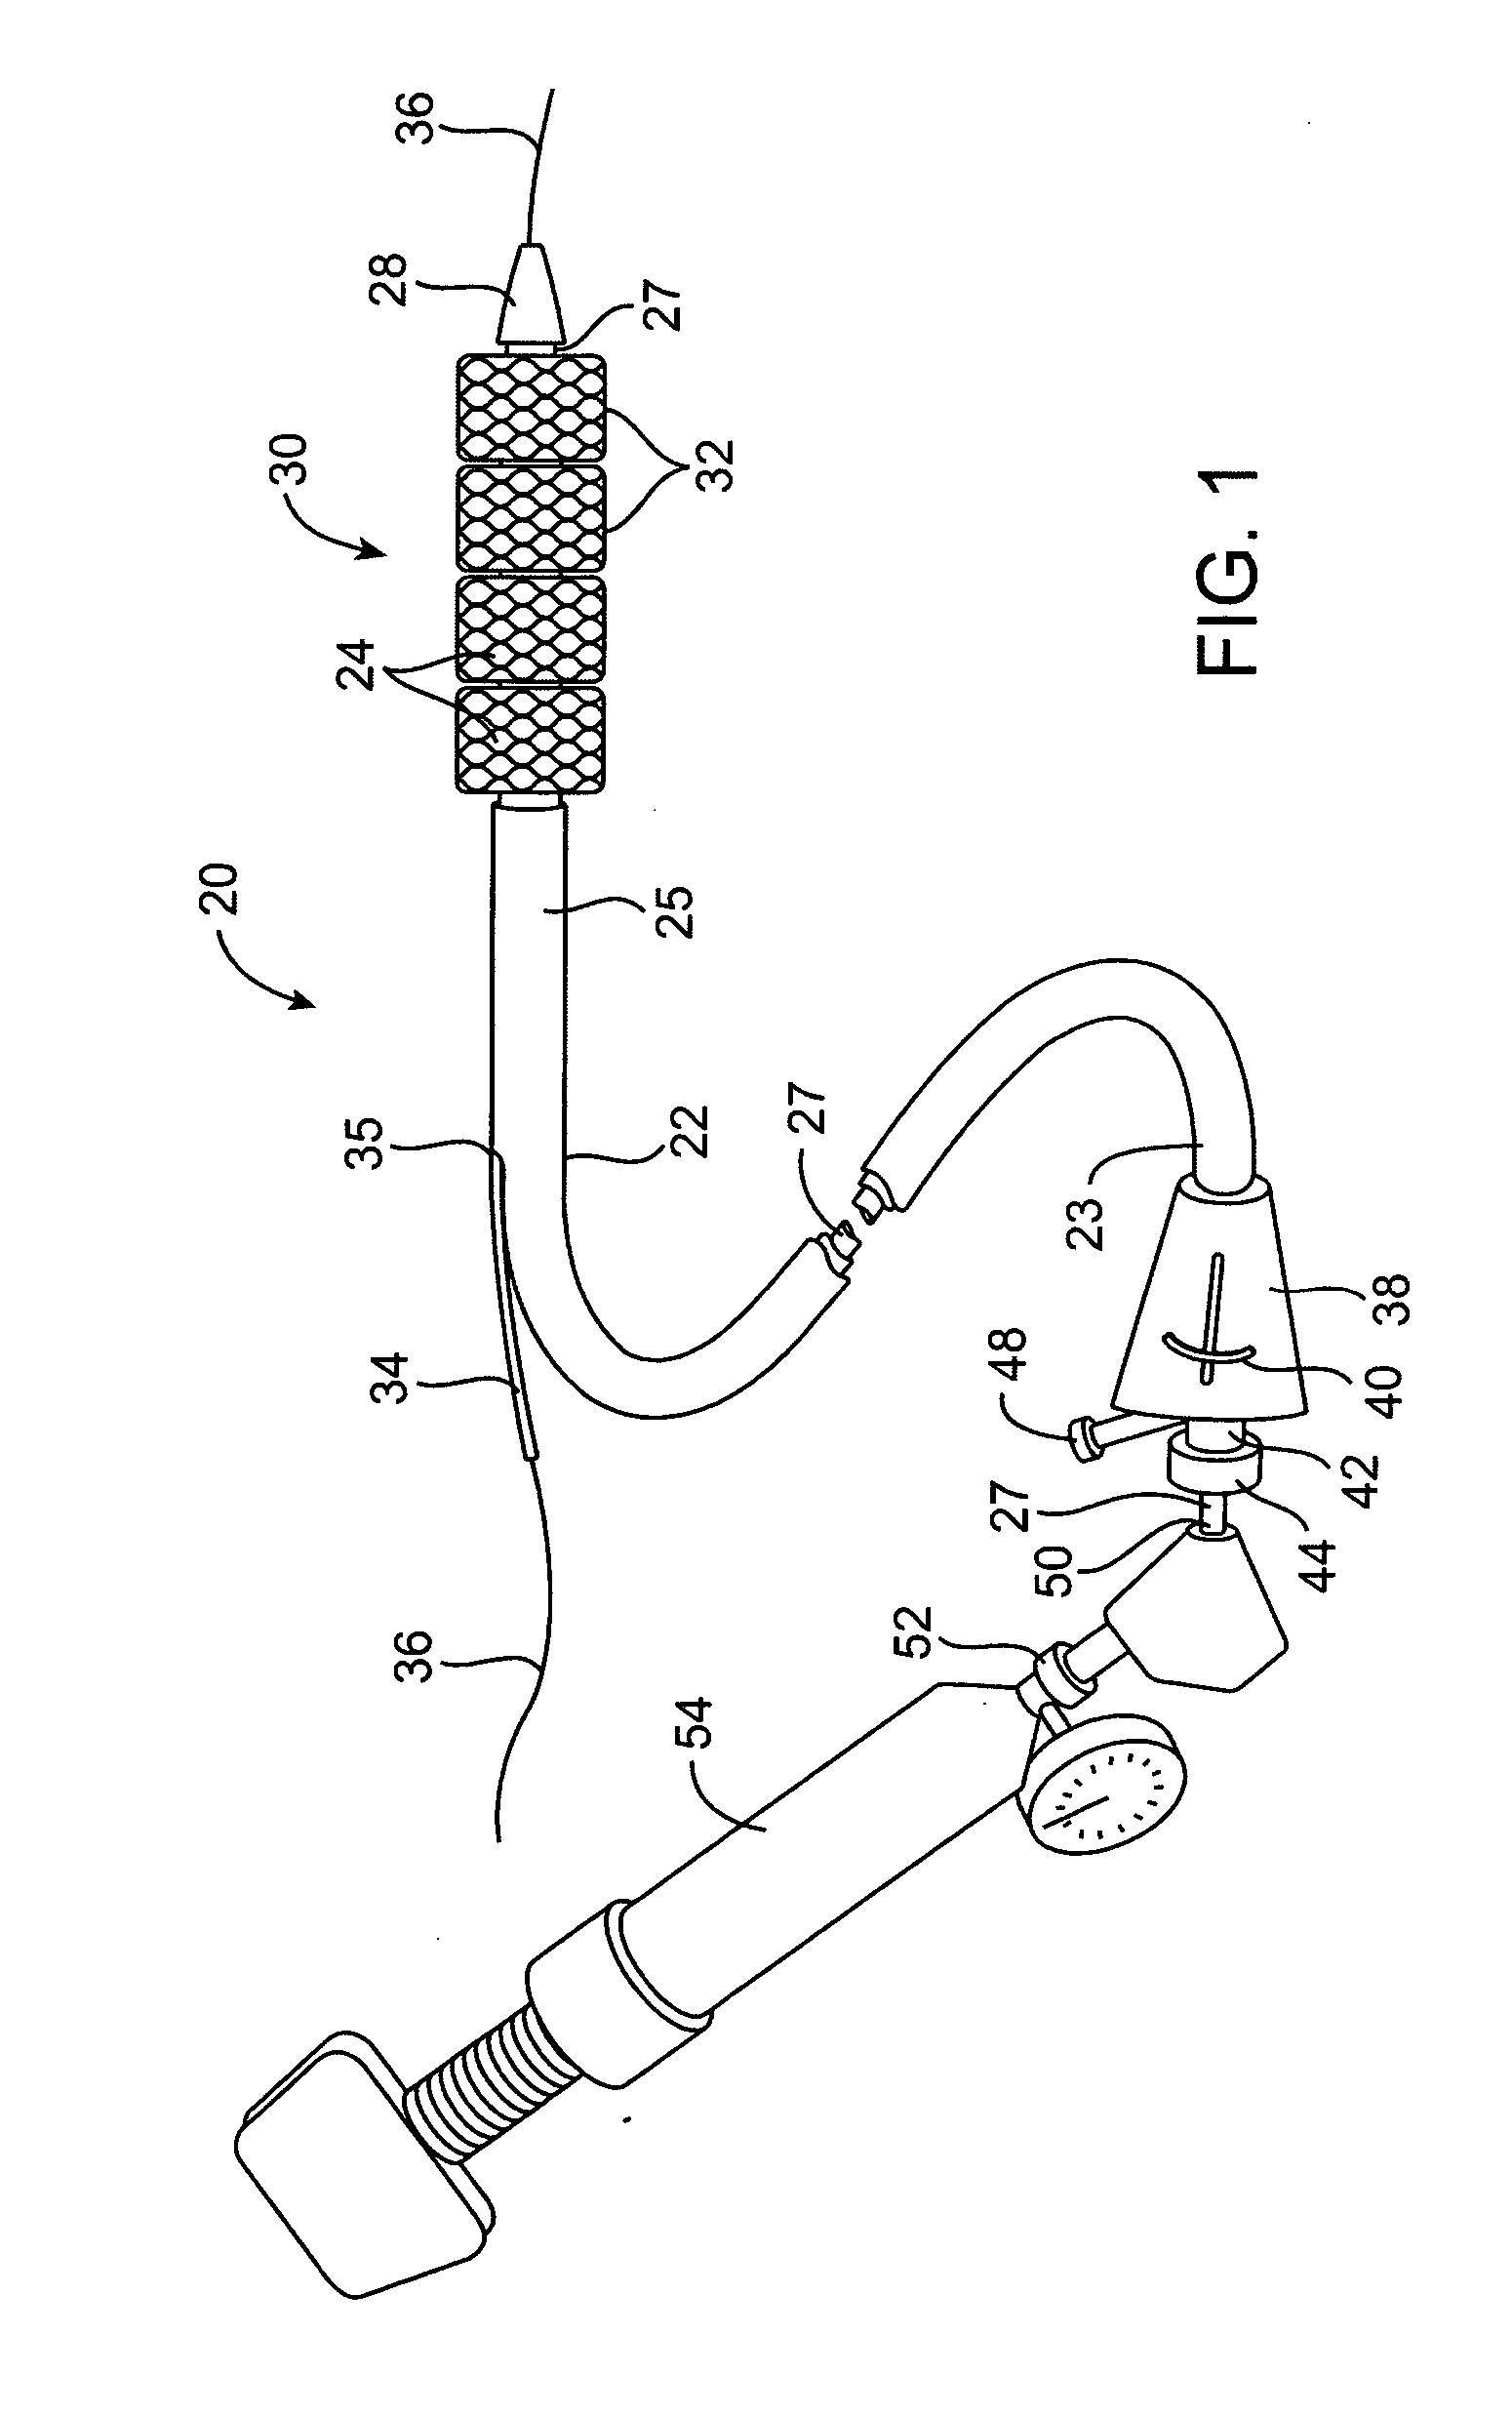 Custom-length stent delivery system with independently operable expansion elements